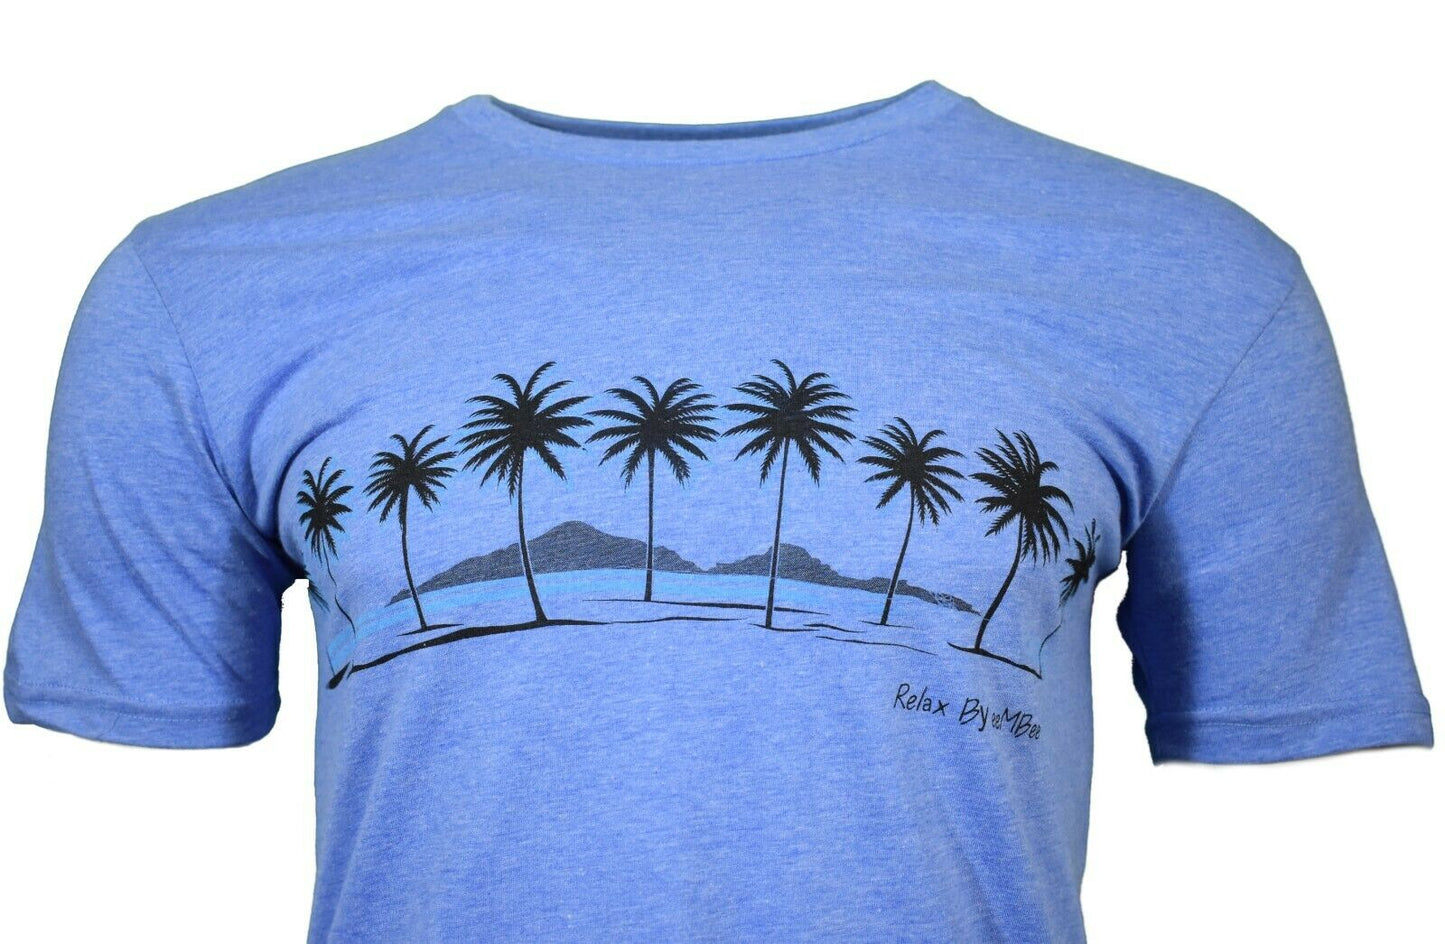 Men's T-Shirt Sunset Beach Palm Trees Relax by eeMBee